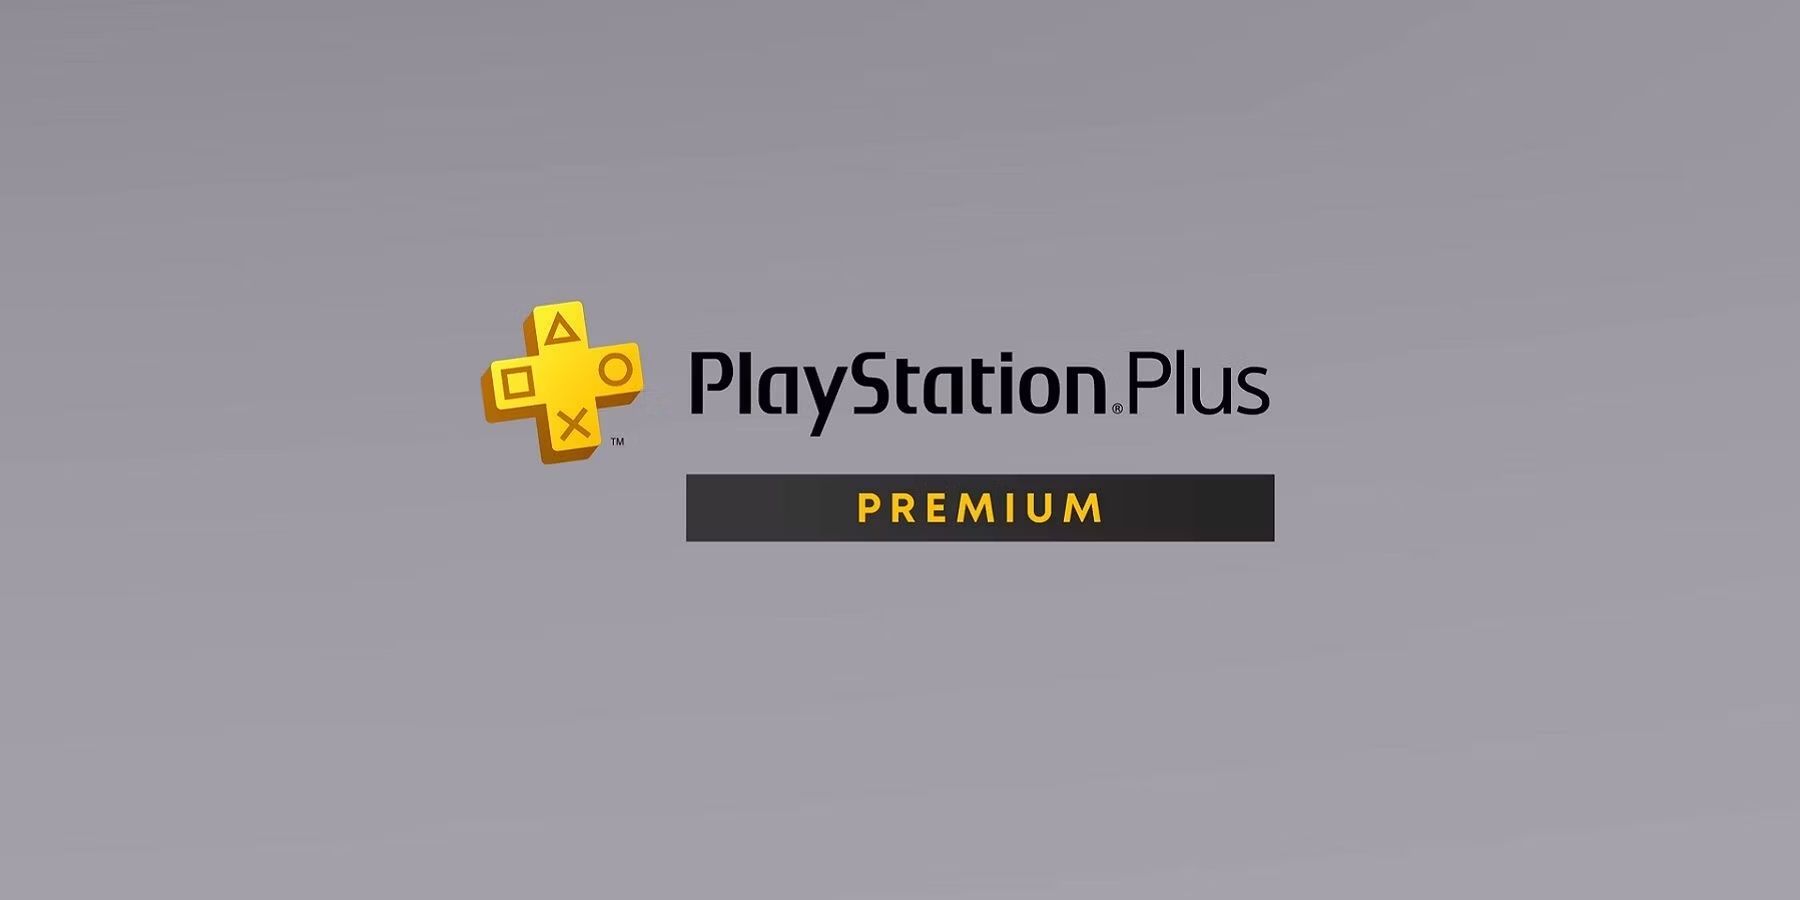 PS Plus Extra and Premium November 2023 reveal time and predicted games -  Mirror Online